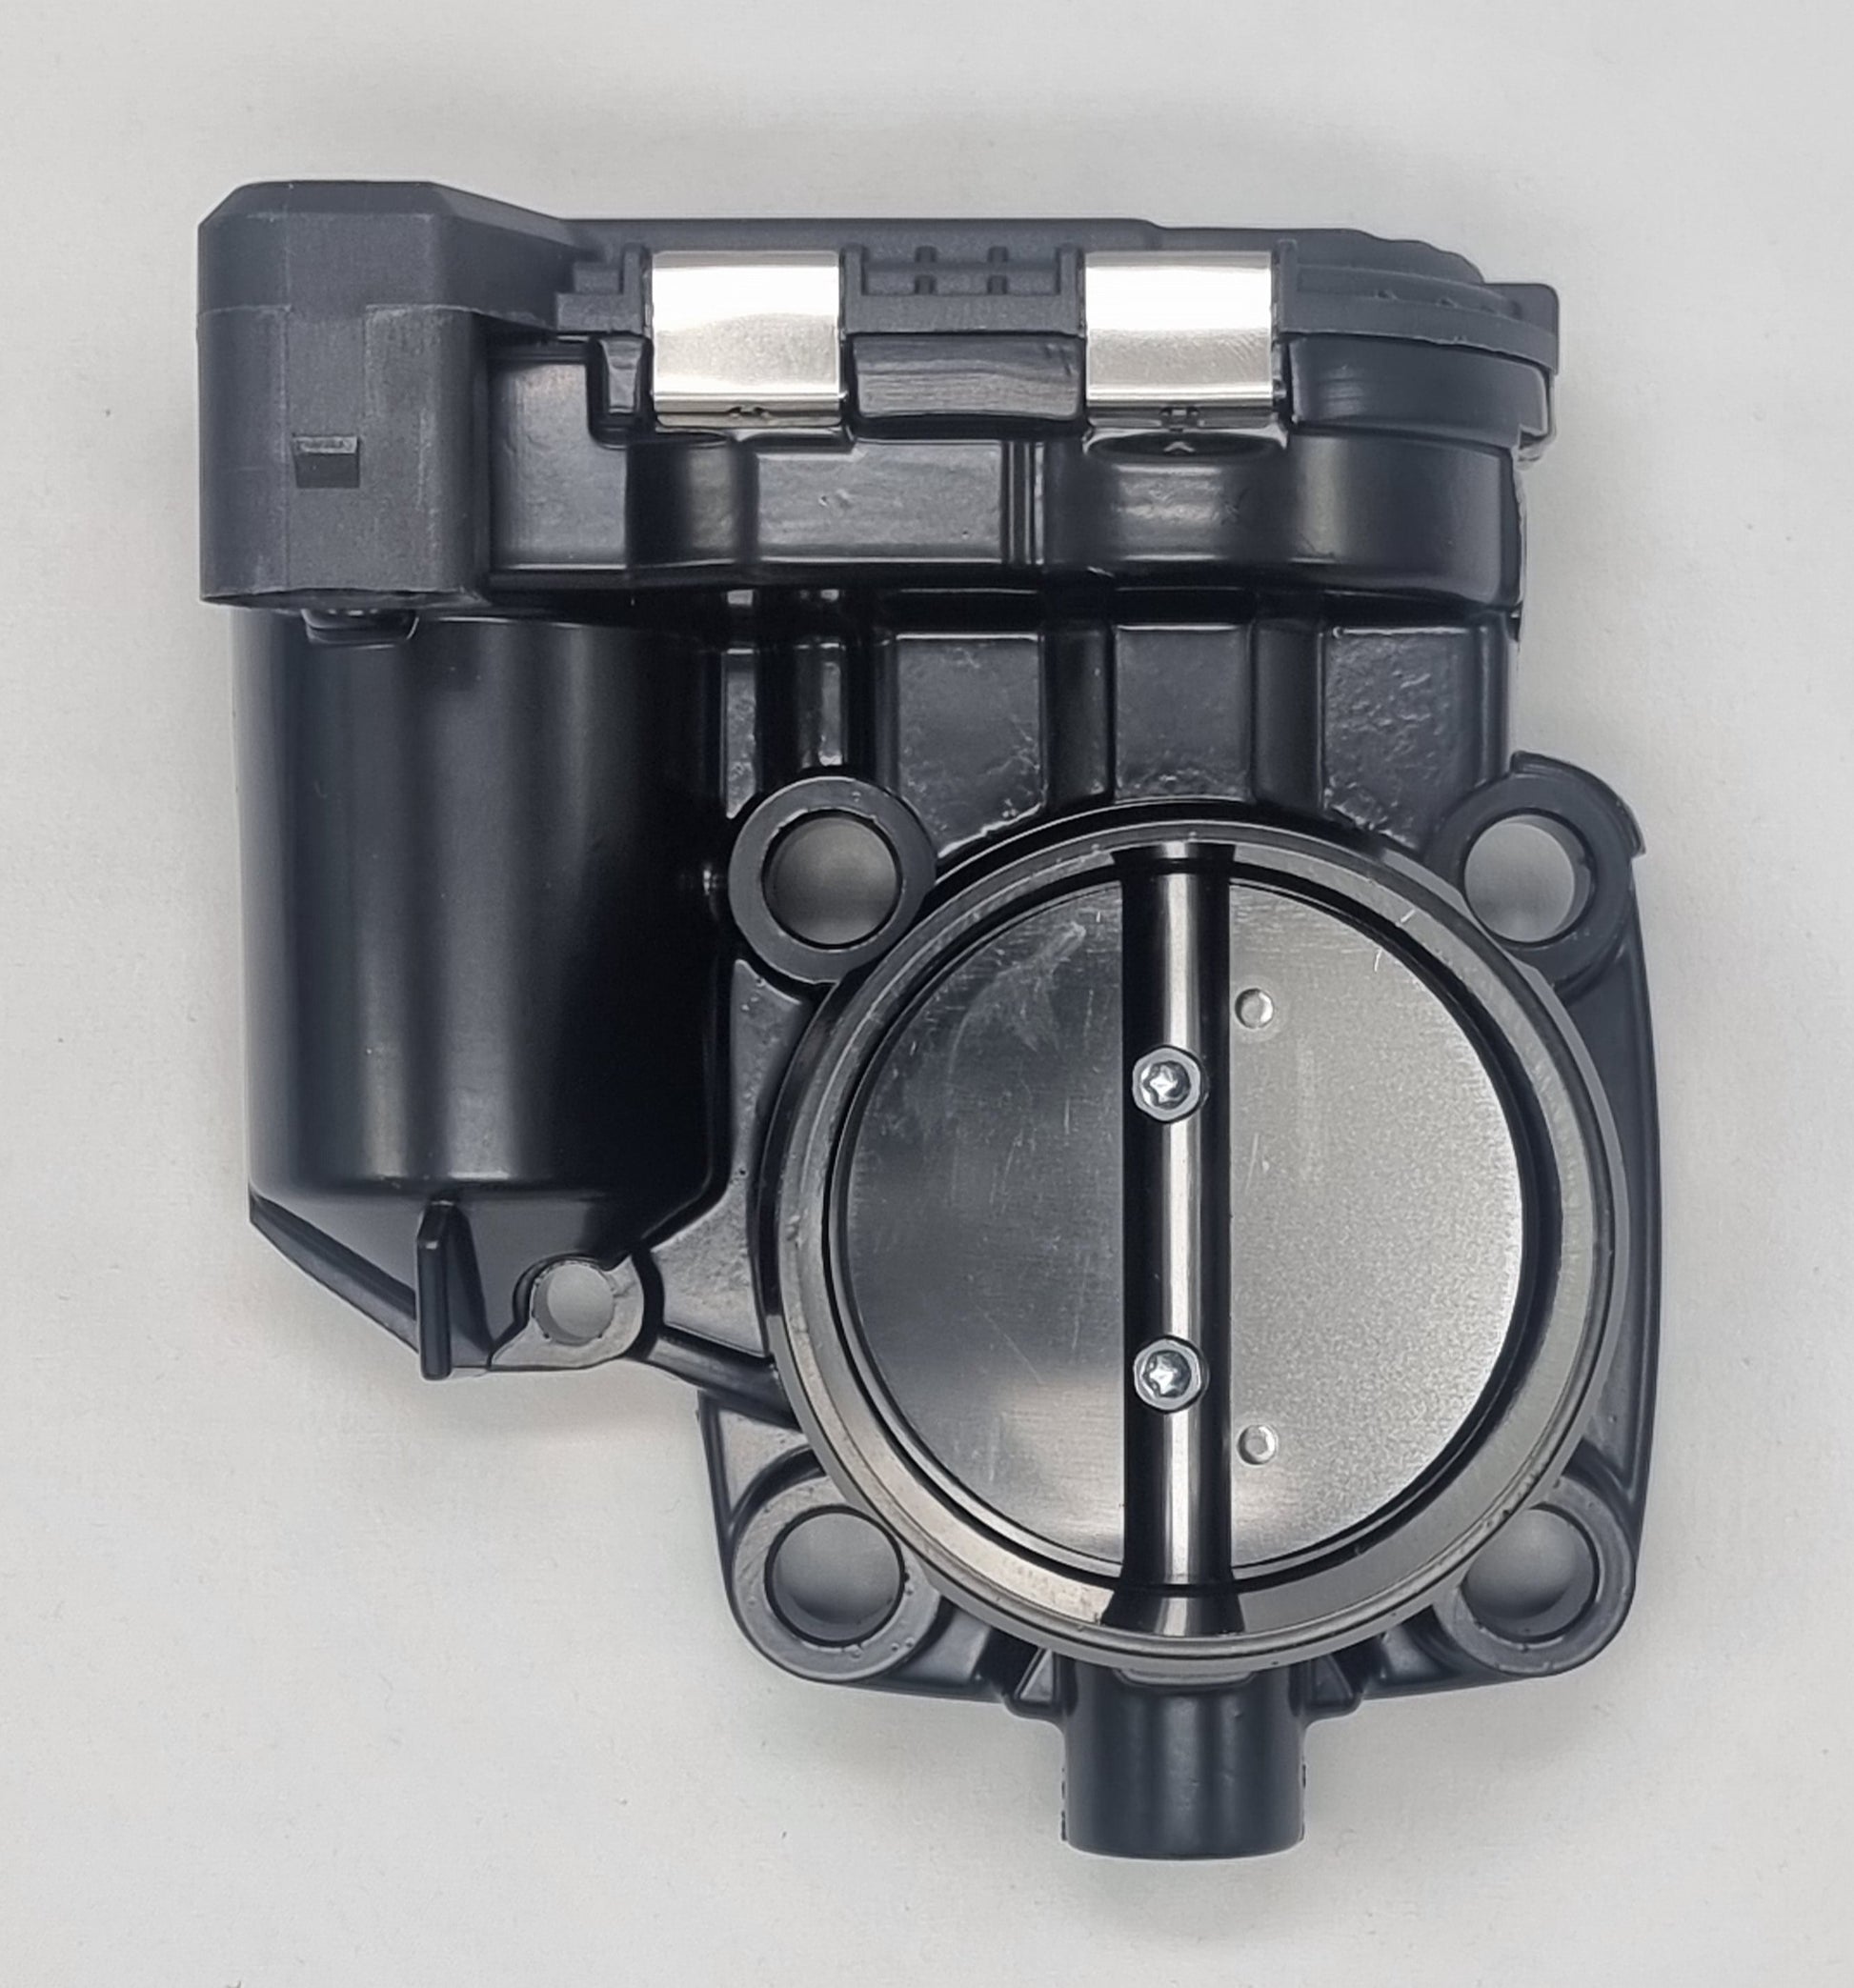 Seadoo throttle body front view